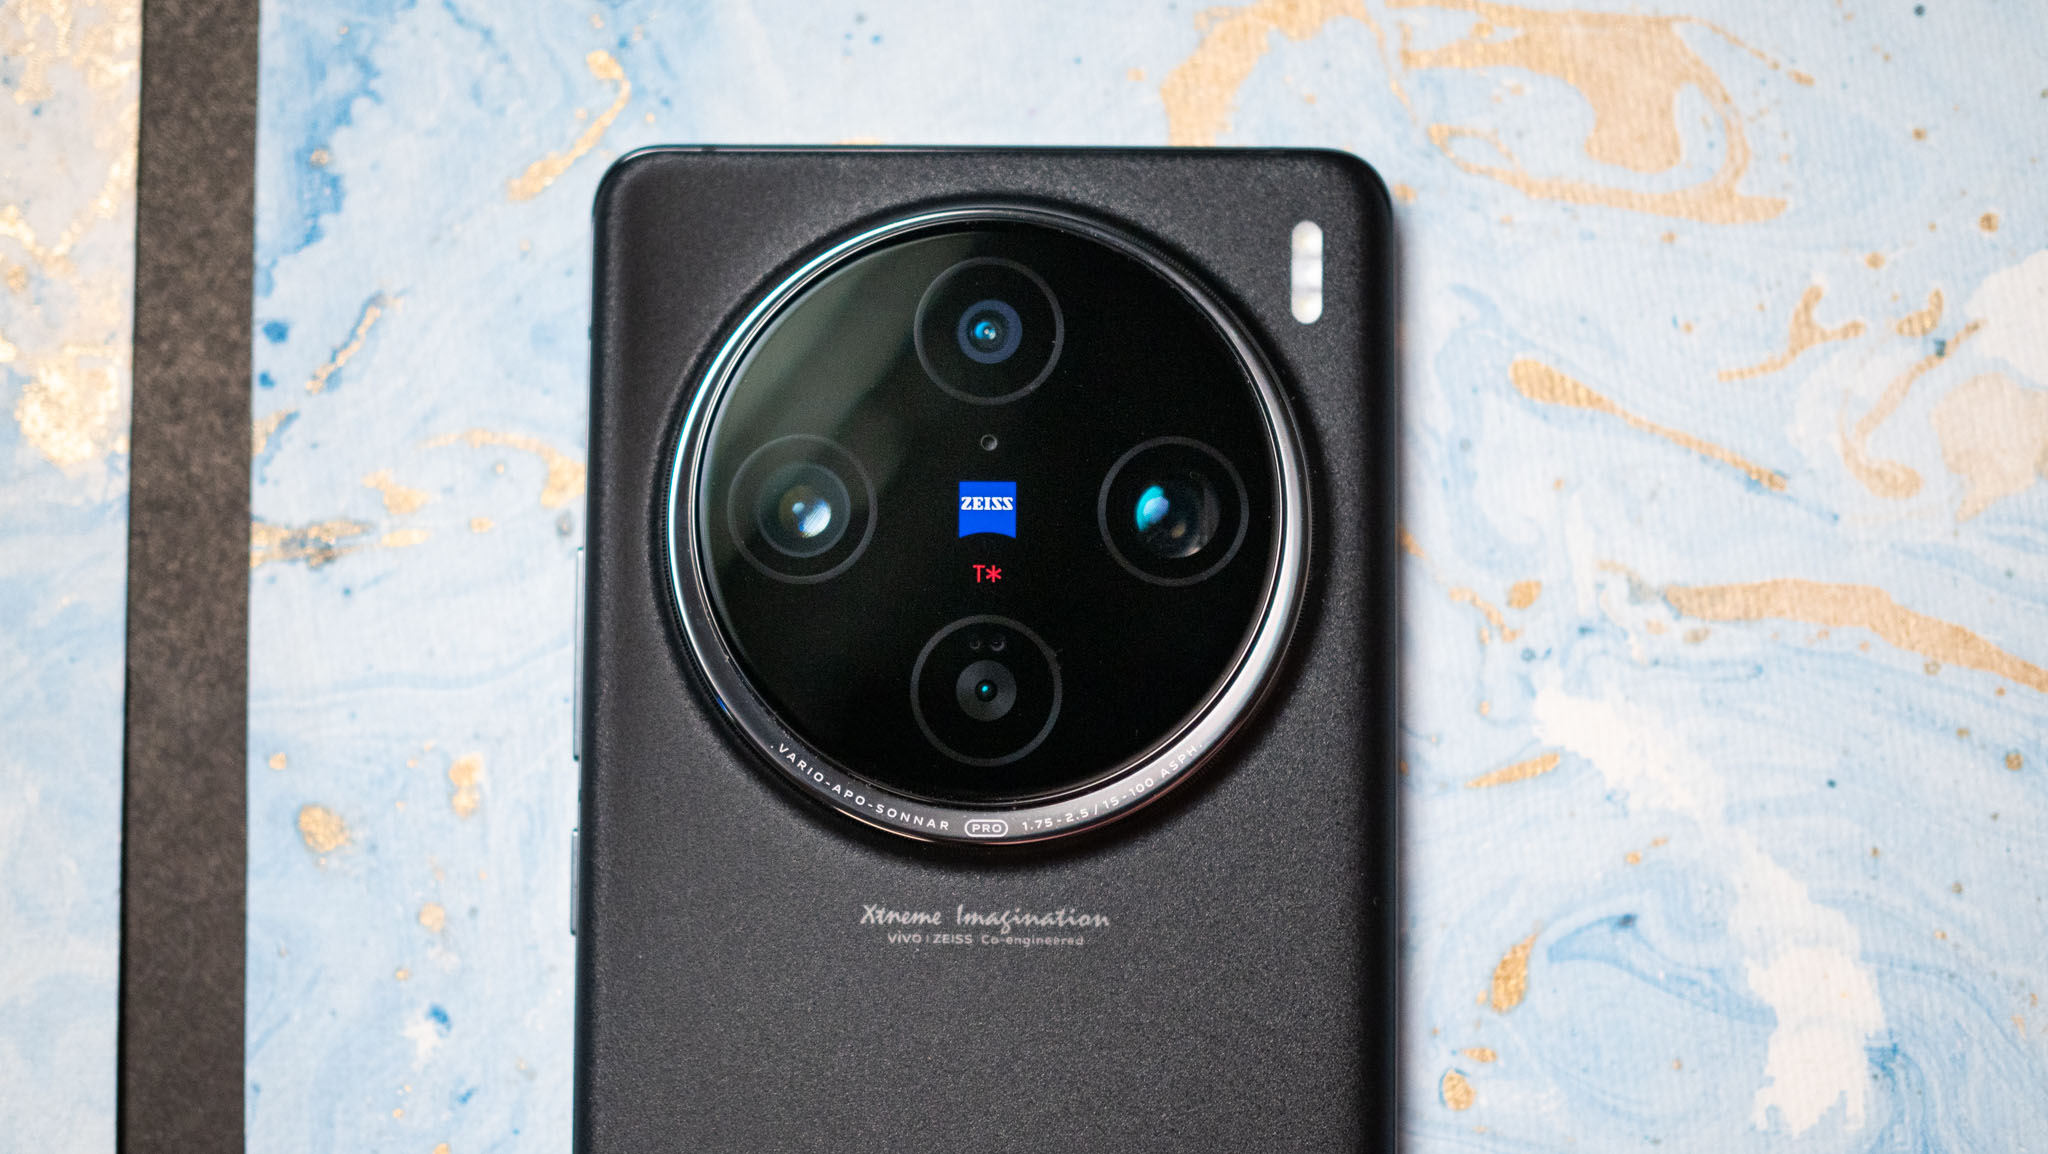 Camera island on the back of the Vivo X100 Pro with Zeiss branding